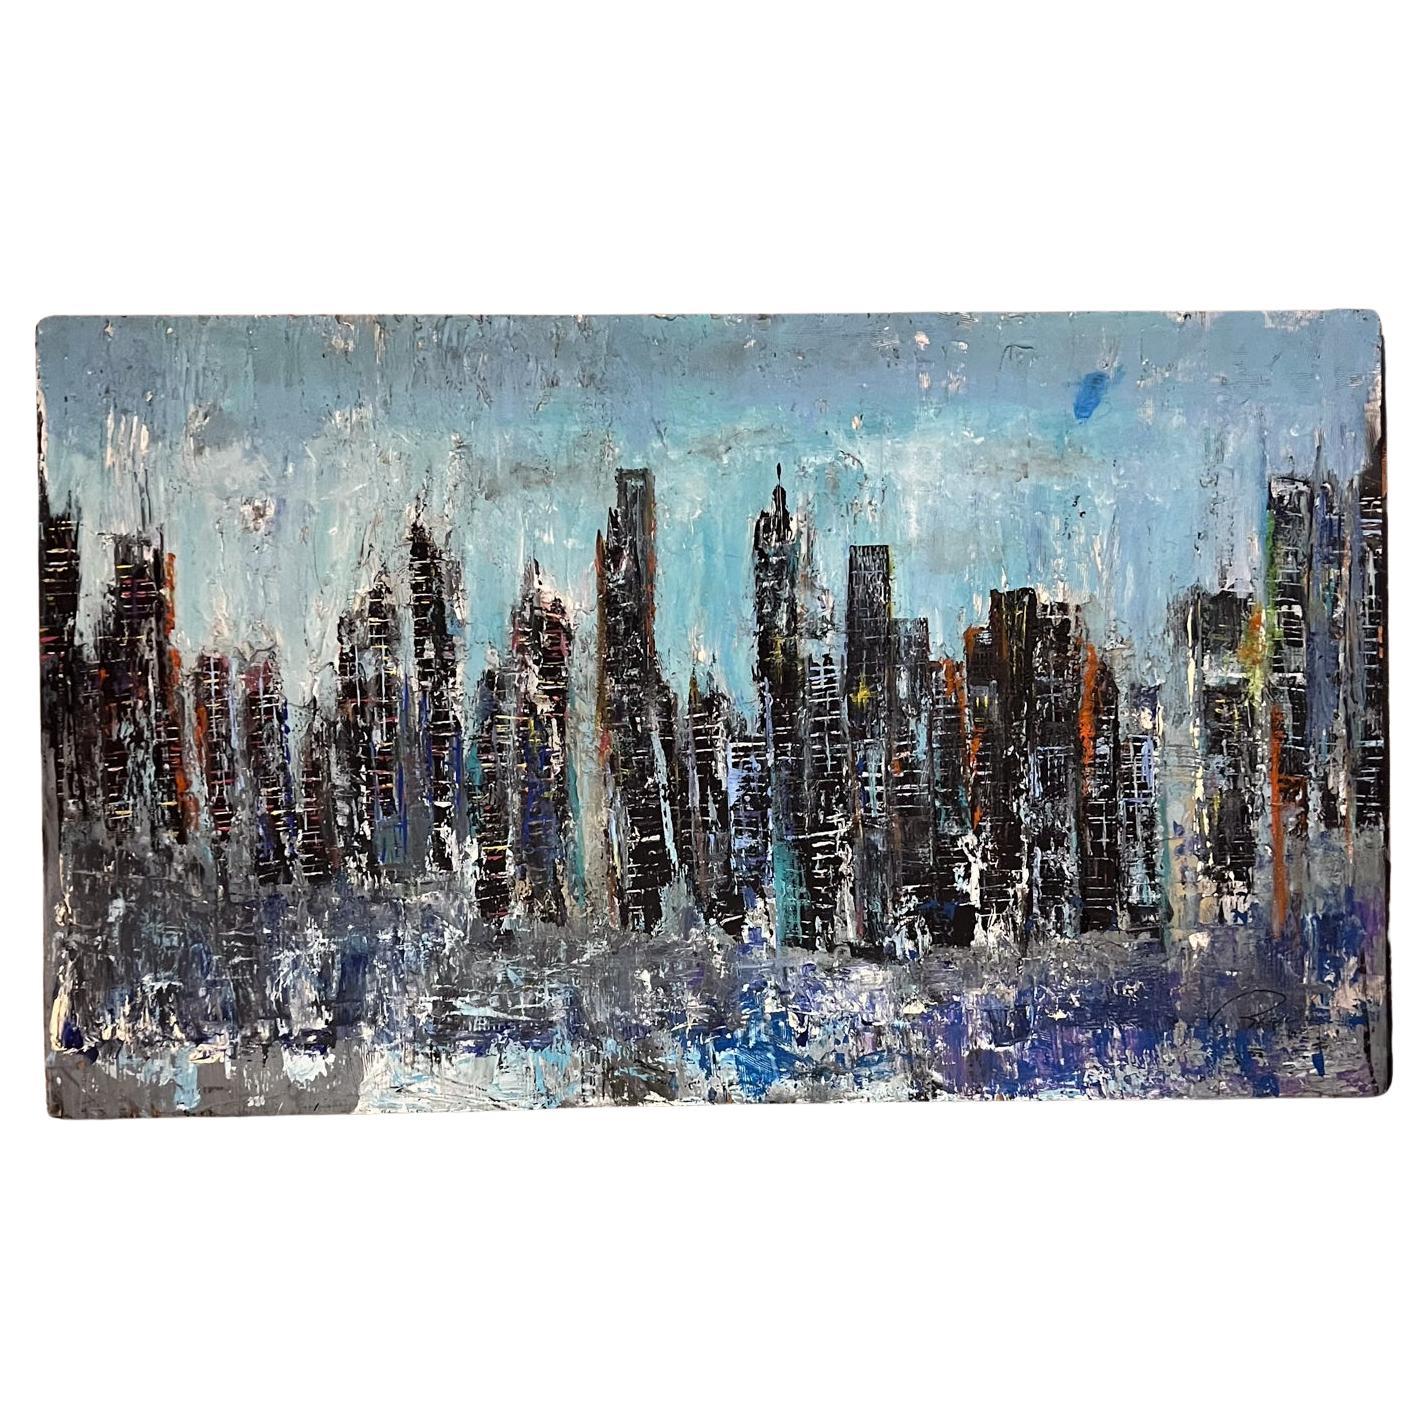  Modern Abstract City Landscape Art Blue Oil Painting